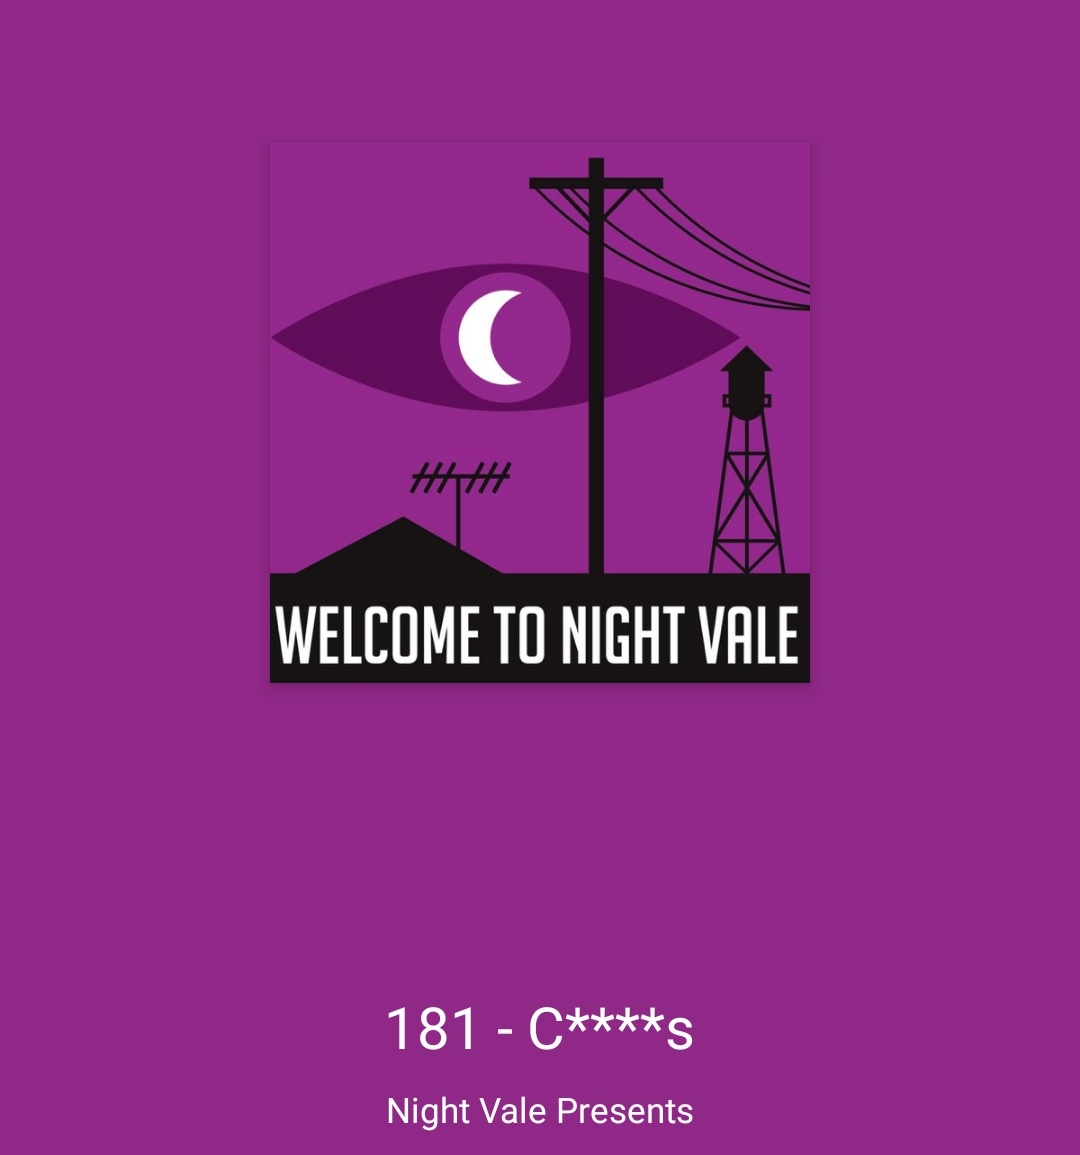 Welcome to night